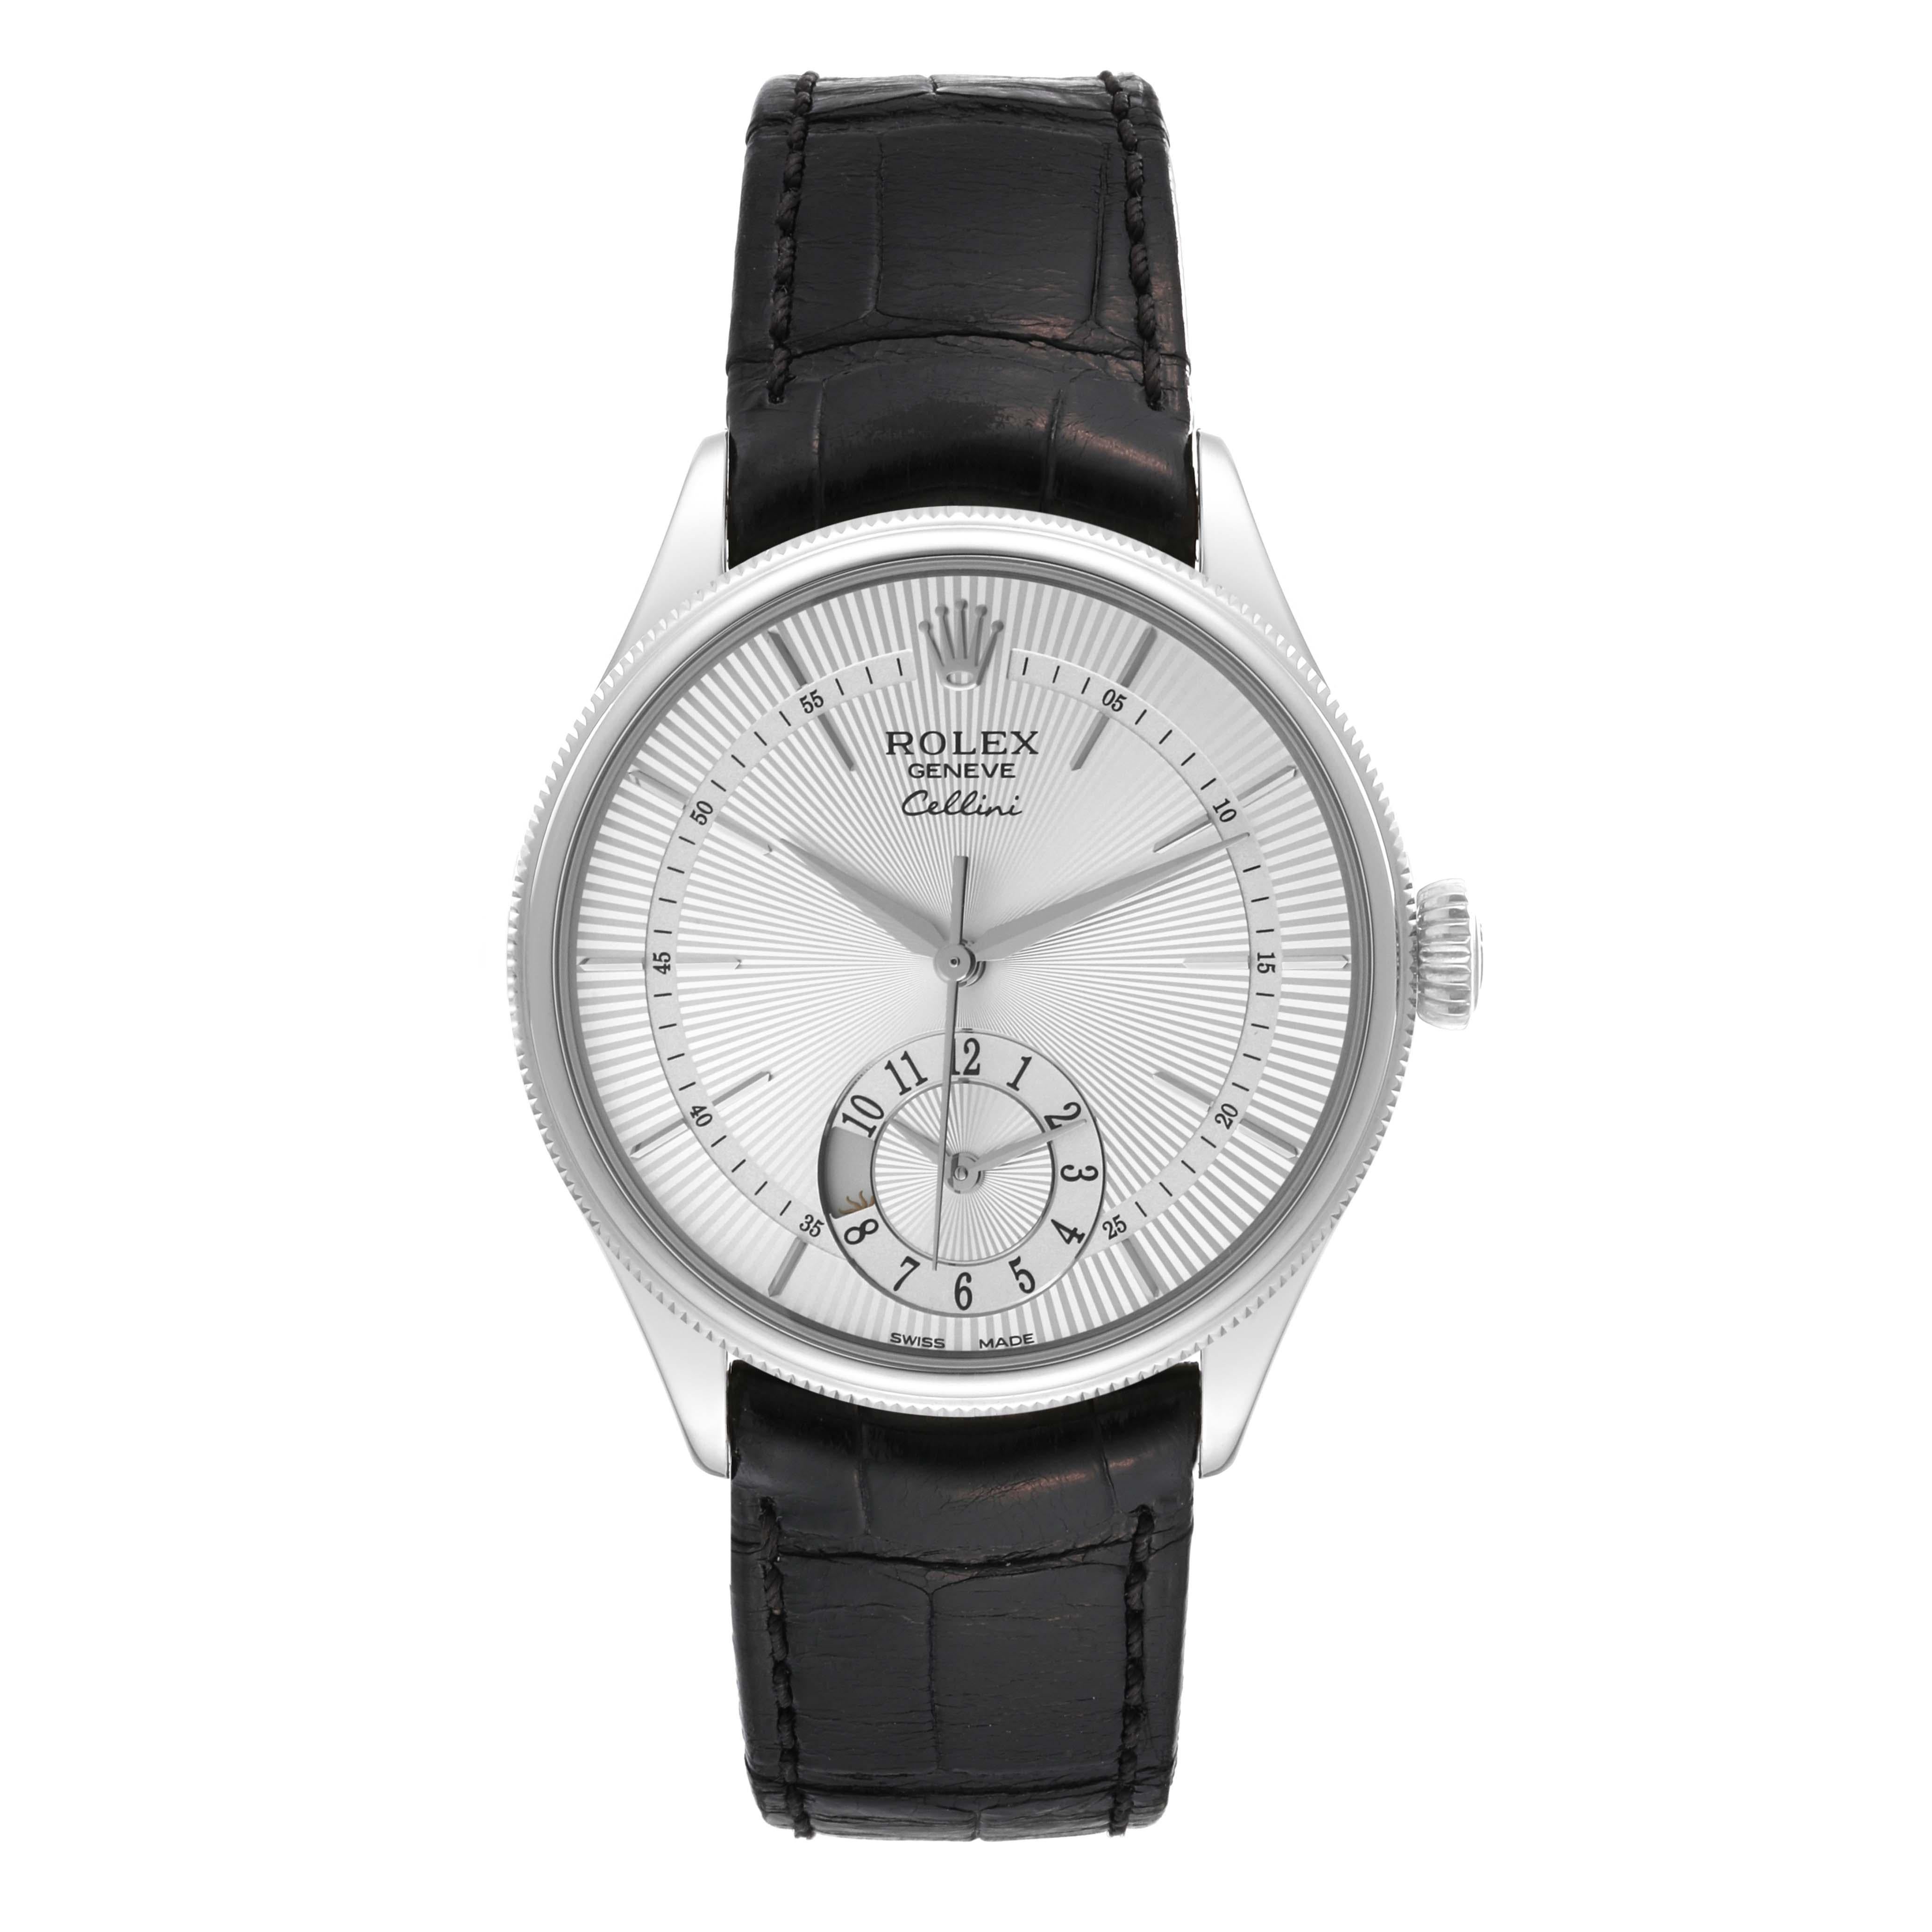 Rolex Cellini Dual Time White Gold Automatic Mens Watch 50529 For Sale 2